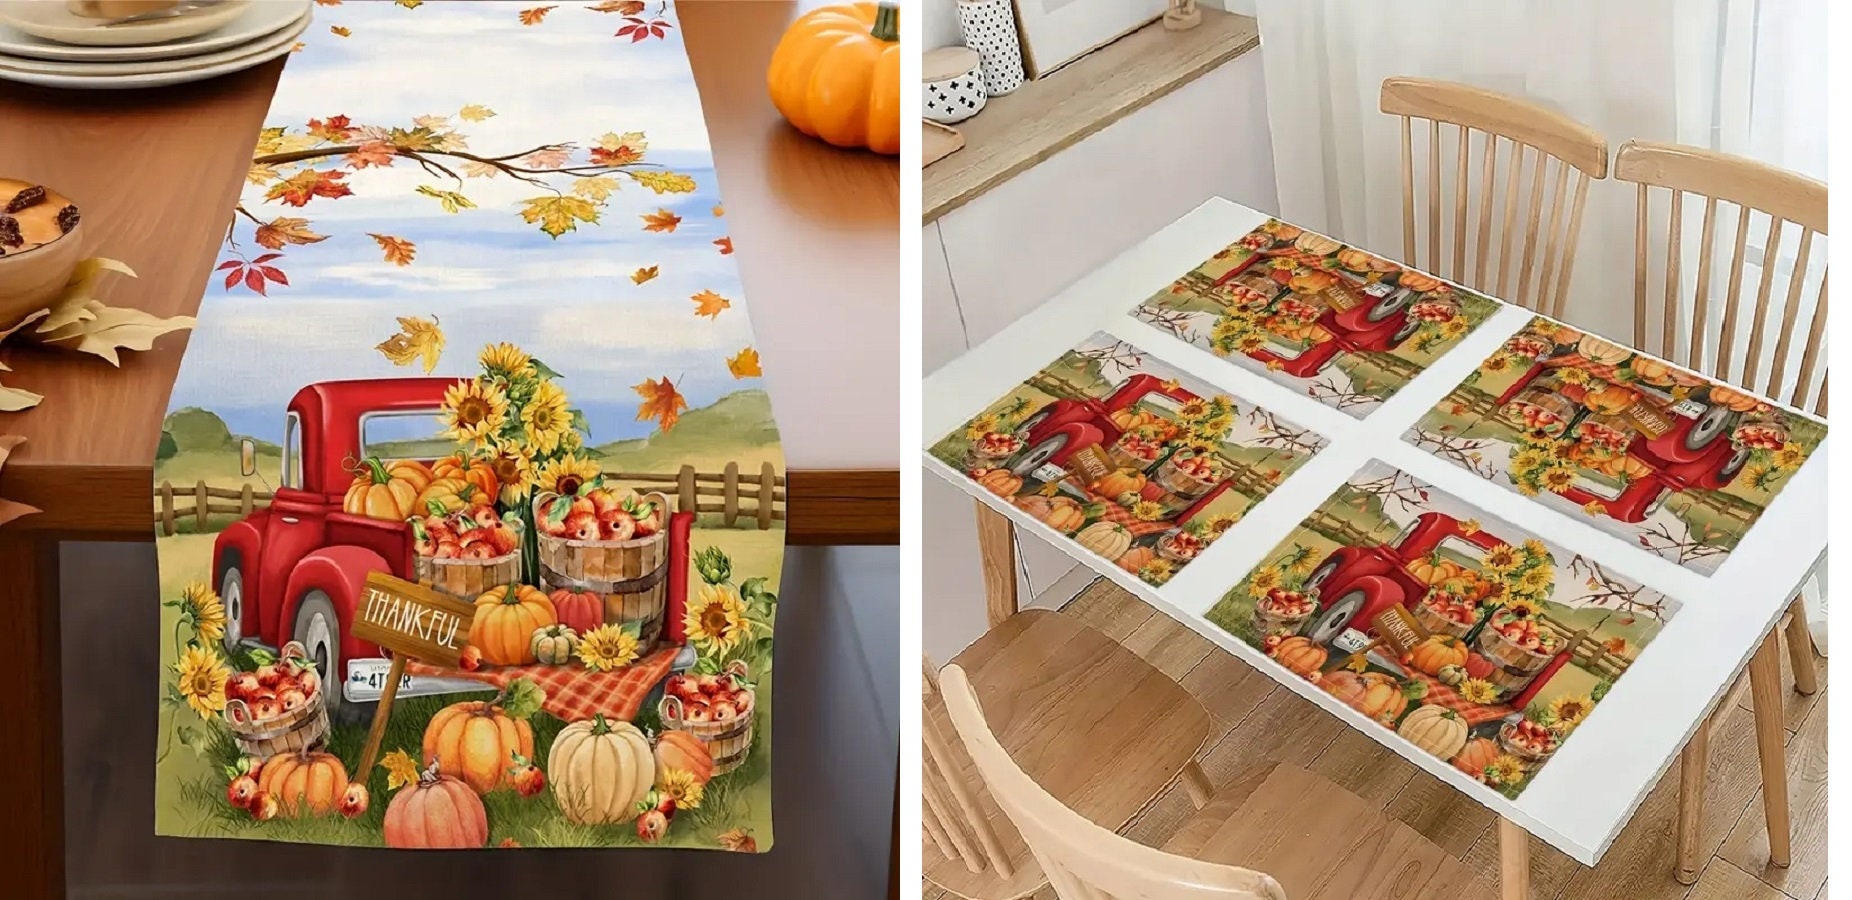 Set a Festive Autumn Table with Leaf Placemats - Quilting Digest